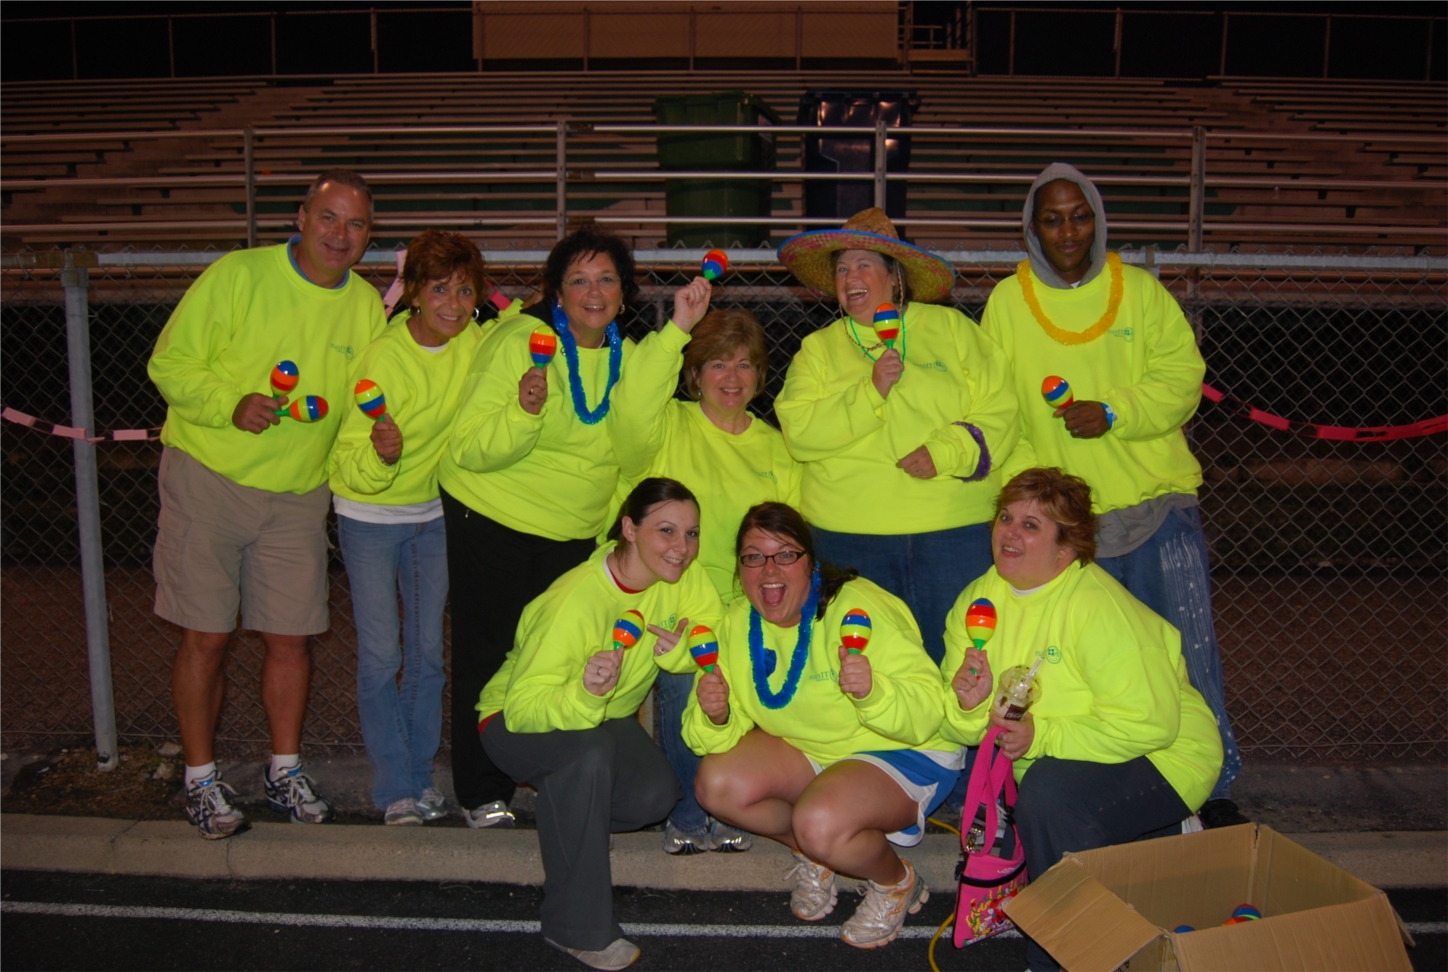 maxIT employees showing their spirit at the Westfield Relay for Life.